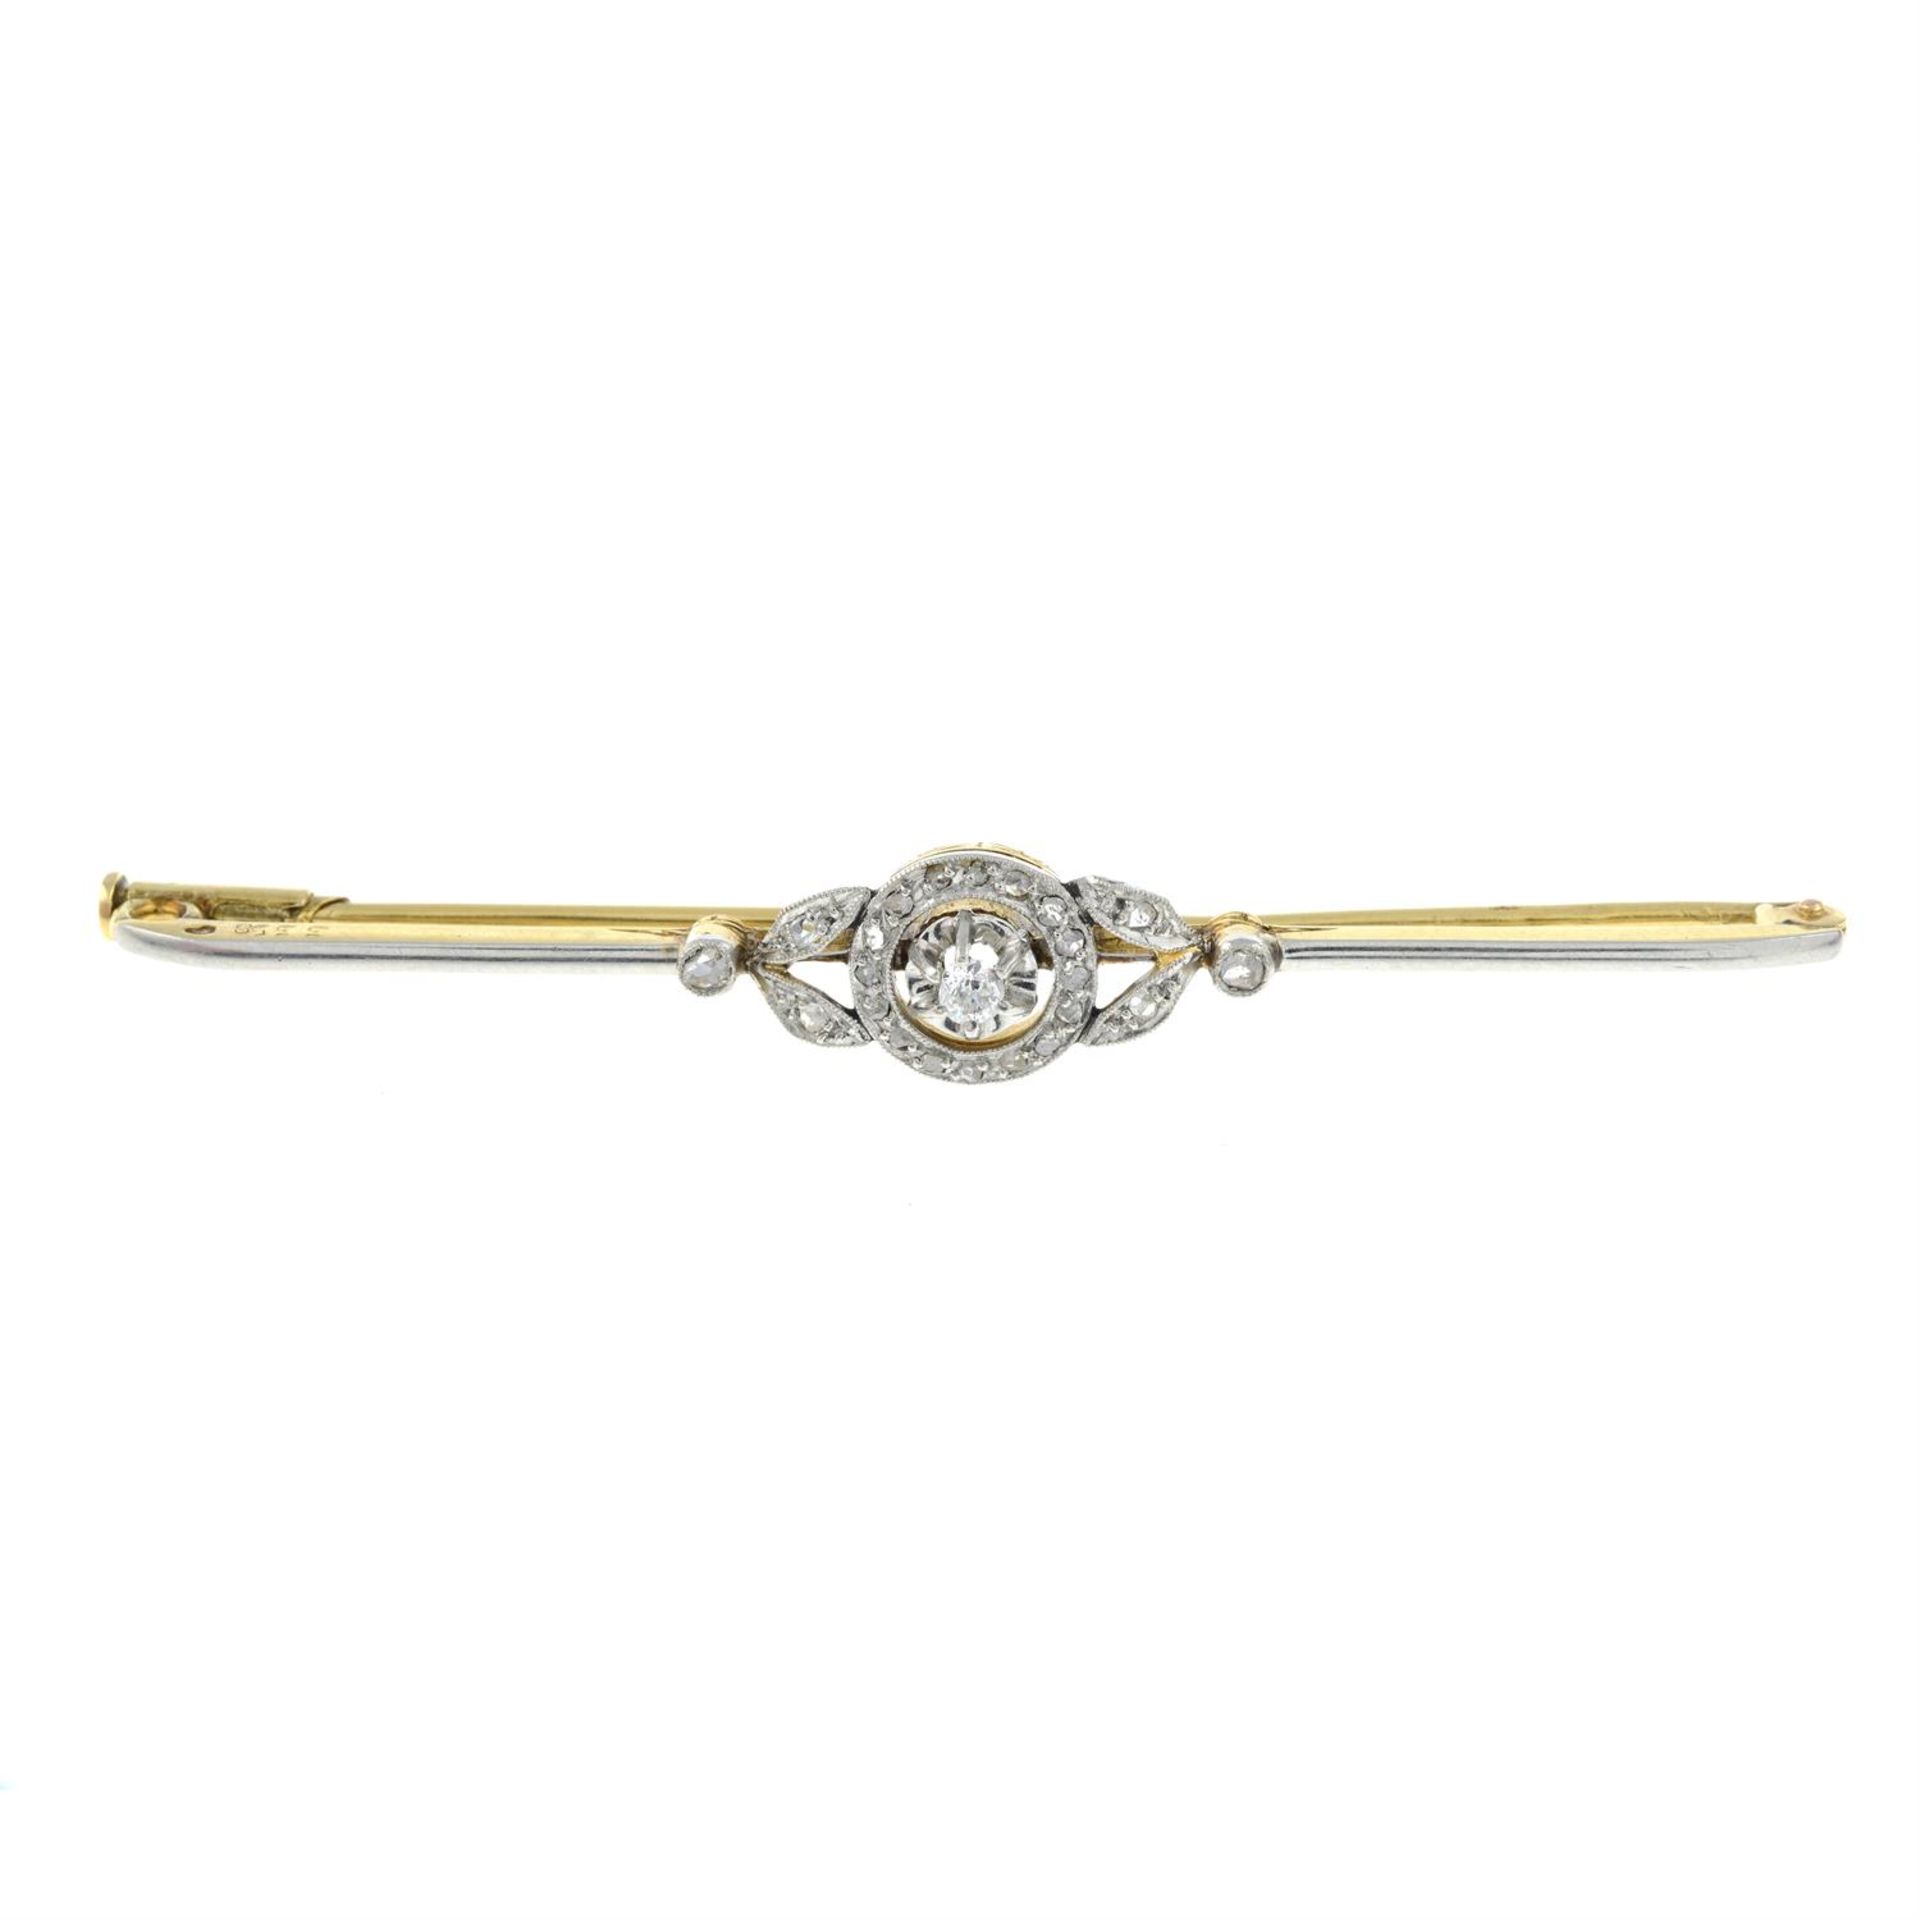 A 14ct gold and platinum old and rose-cut diamond brooch.